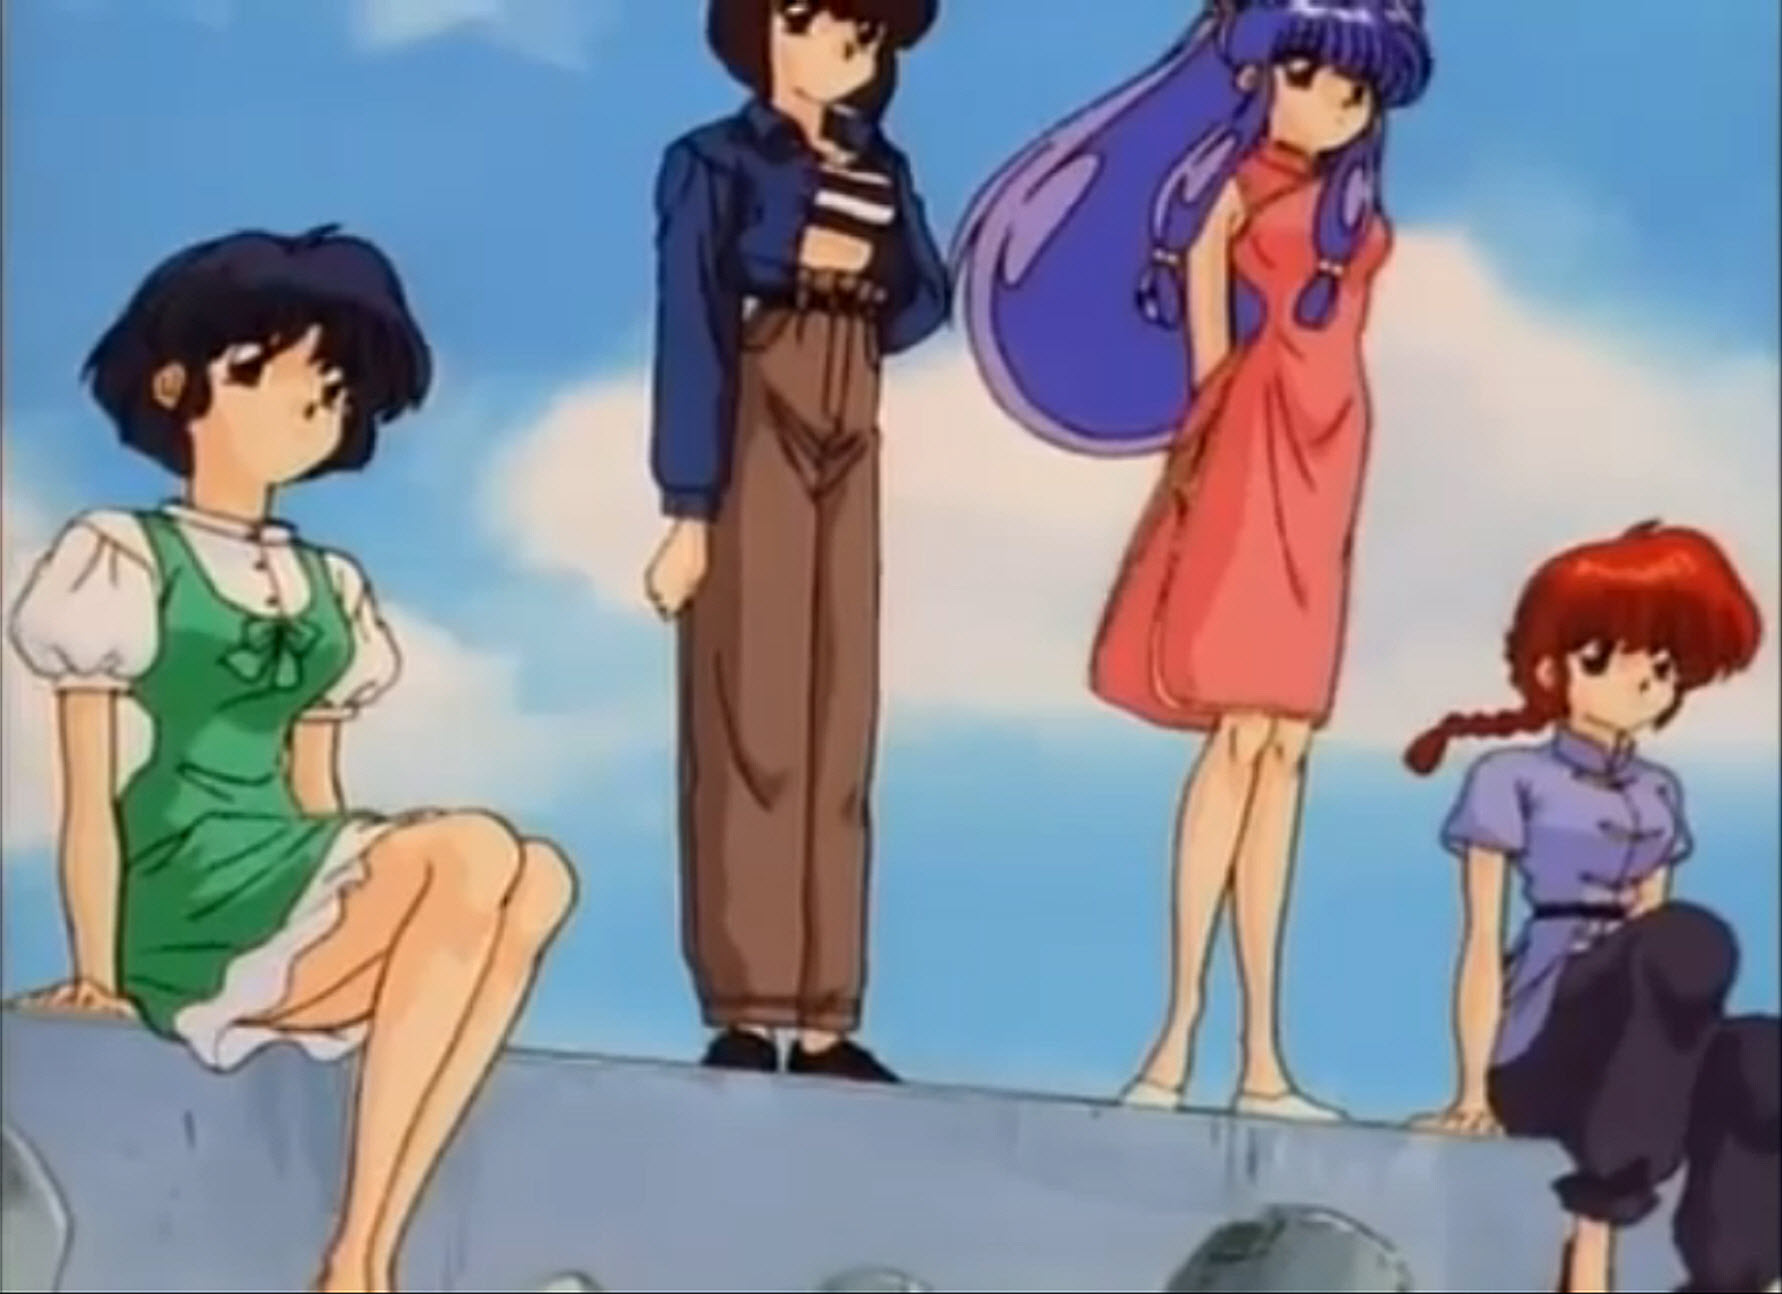 Ranma 1/2 - ranma 1 2 (a boy who changes in to a girl) Image (27273764 ...